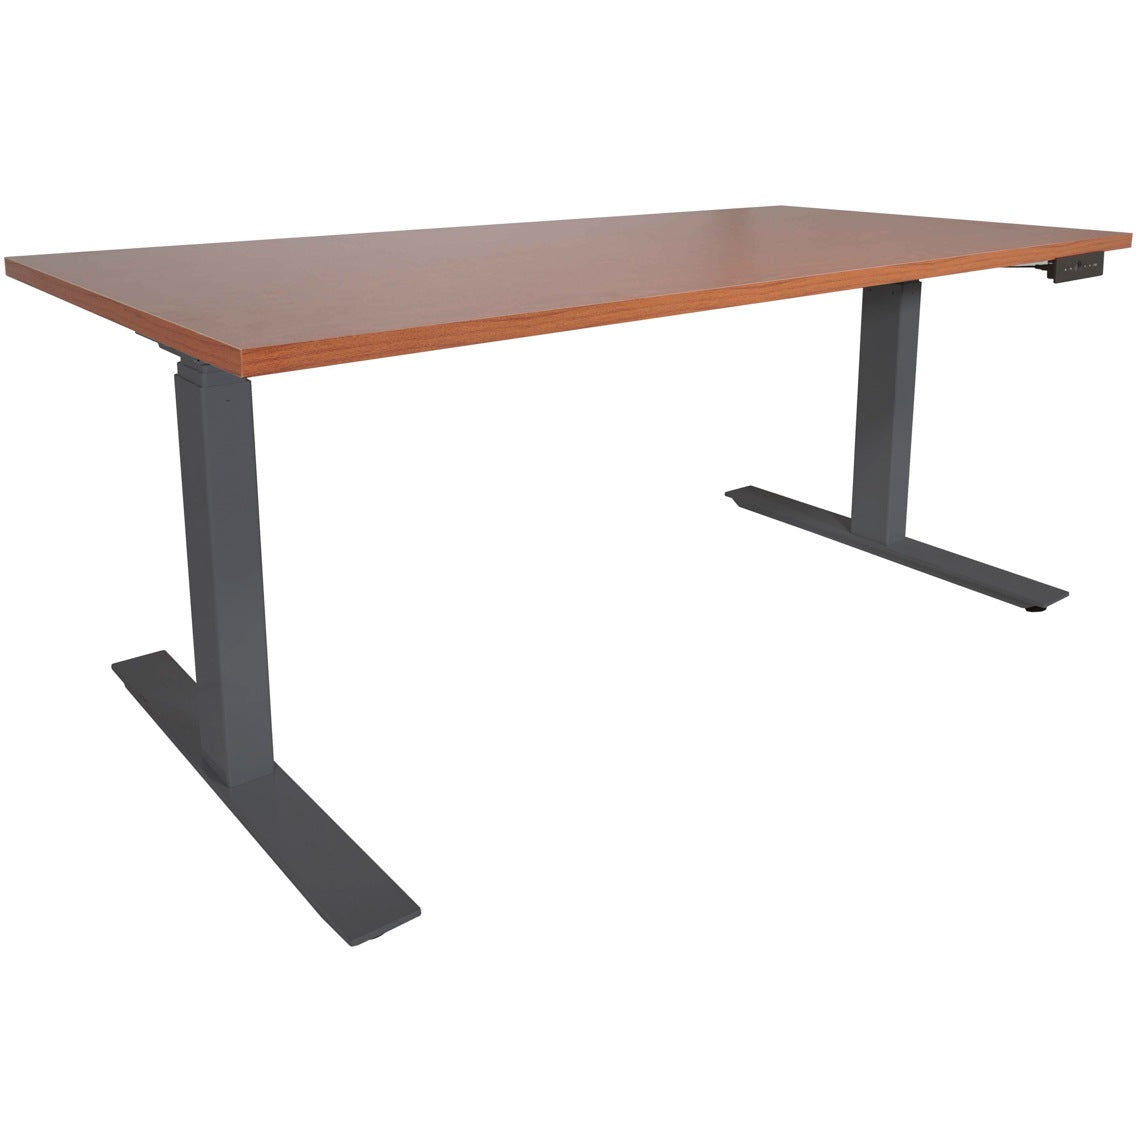 A6 Adjustable Sit To Stand Desk 24"- 50" w/ Wood 30" x 48" Top - view 6